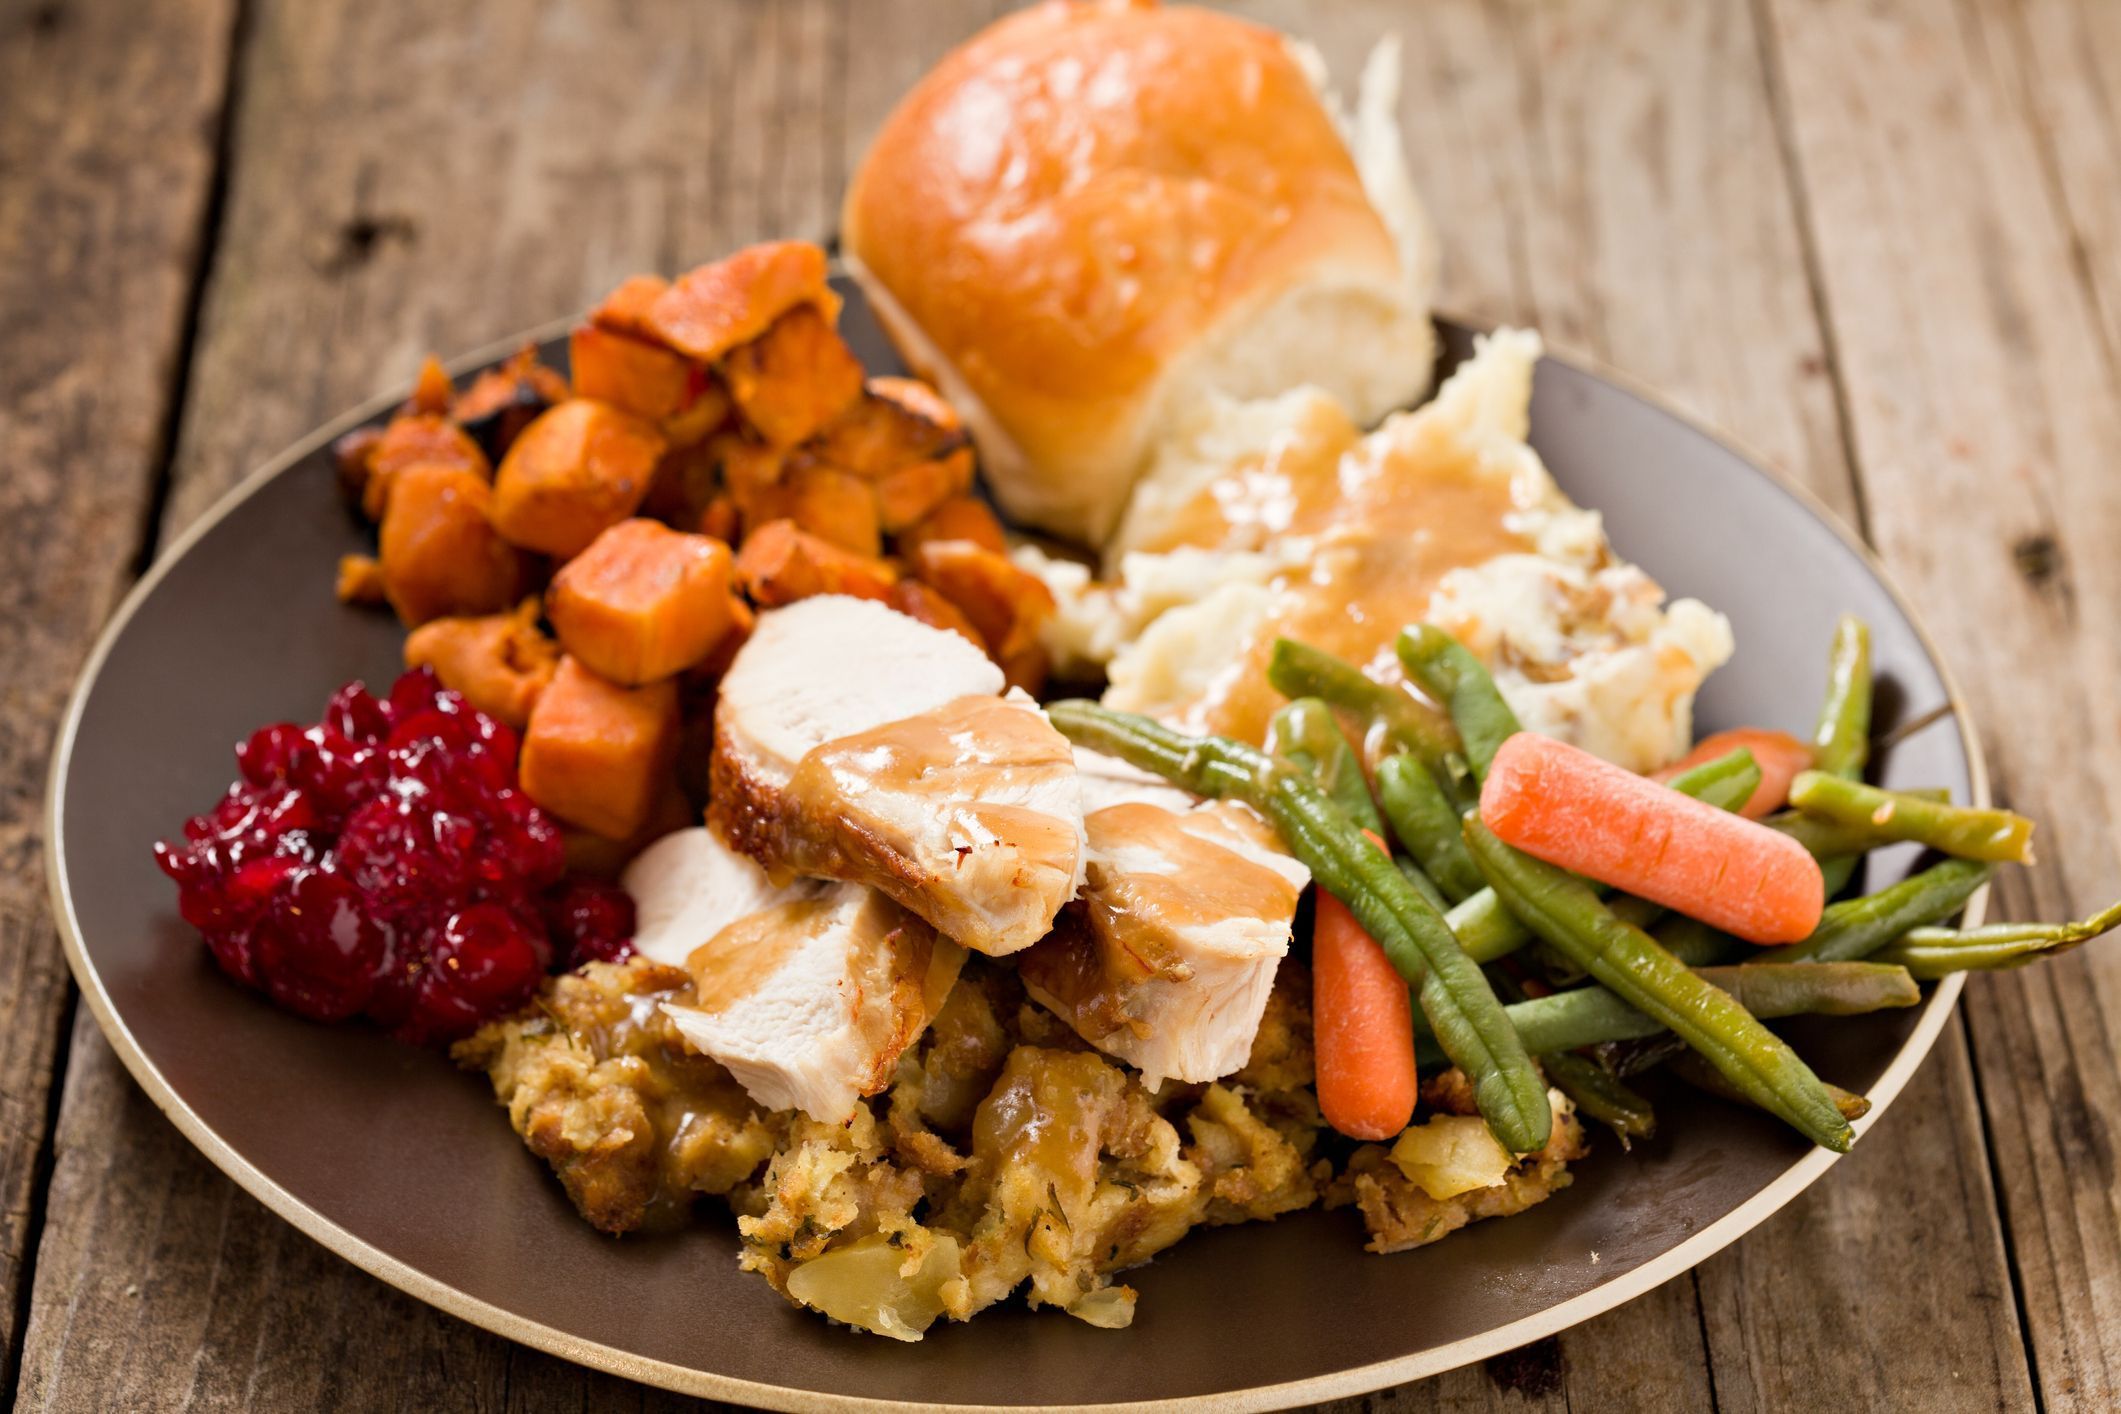 Where to get Thanksgiving meals to go; dine out on Thanksgiving